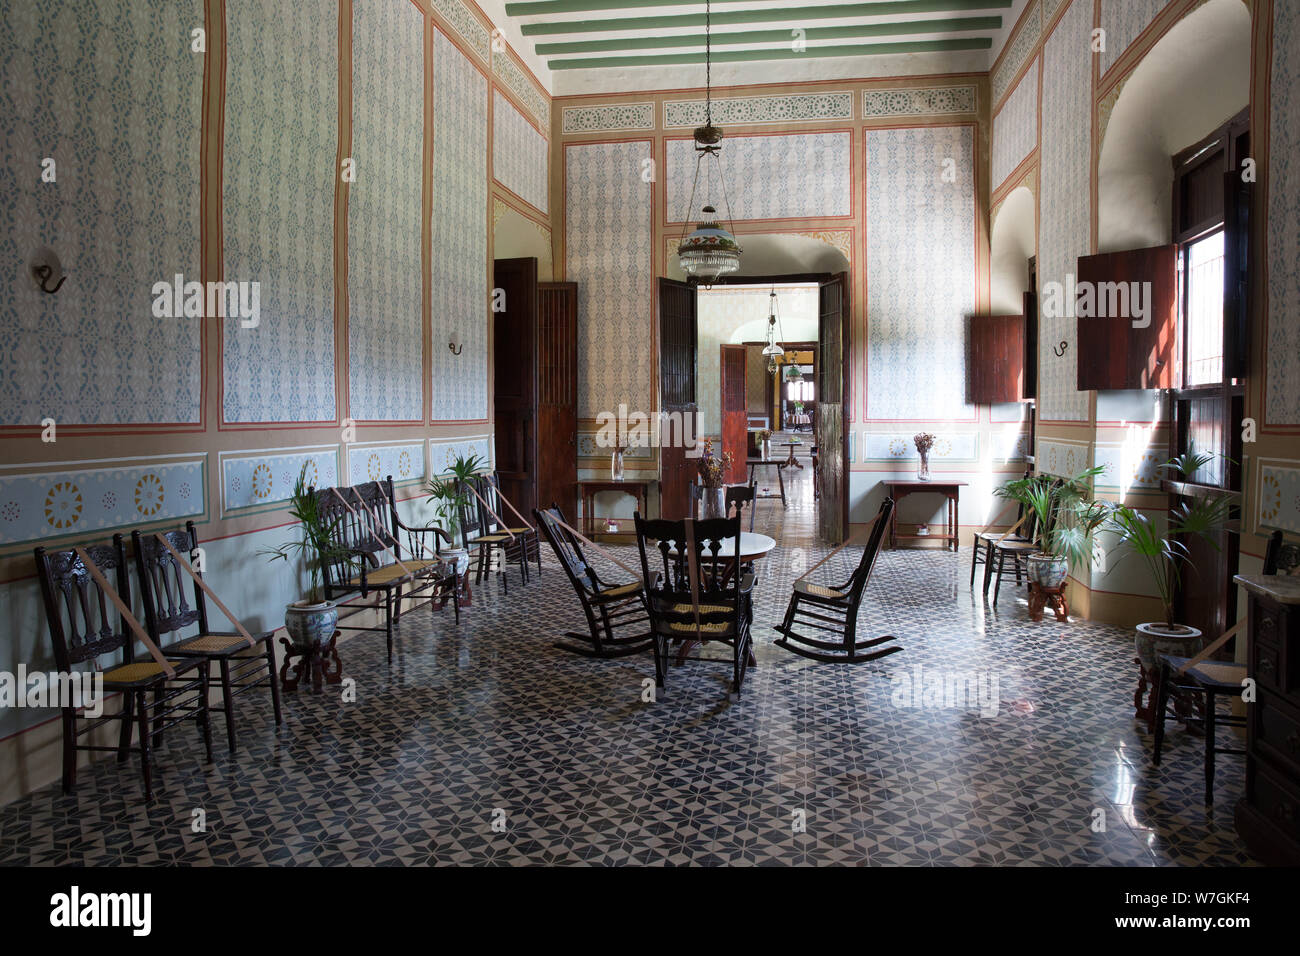 Rooms with colonial antique furniture in the main house of Hacienda Yaxcopoil in the Uman Municipality, state of Yucatan, Mexico on July 22, 2019. Hacienda Yaxcopoil dates back to the 17th century and was once considered one of the most important rural estates in the Yucatan, spreading across 22,000 acres. It operated first as a cattle ranch and later as a henequen plantation during the golden age of the 'agave sisal'. Over time, due to continuous political, social and economic changes, the estate has been reduced to less than 3% of its original size. The production of henequen fiber in the ha Stock Photo